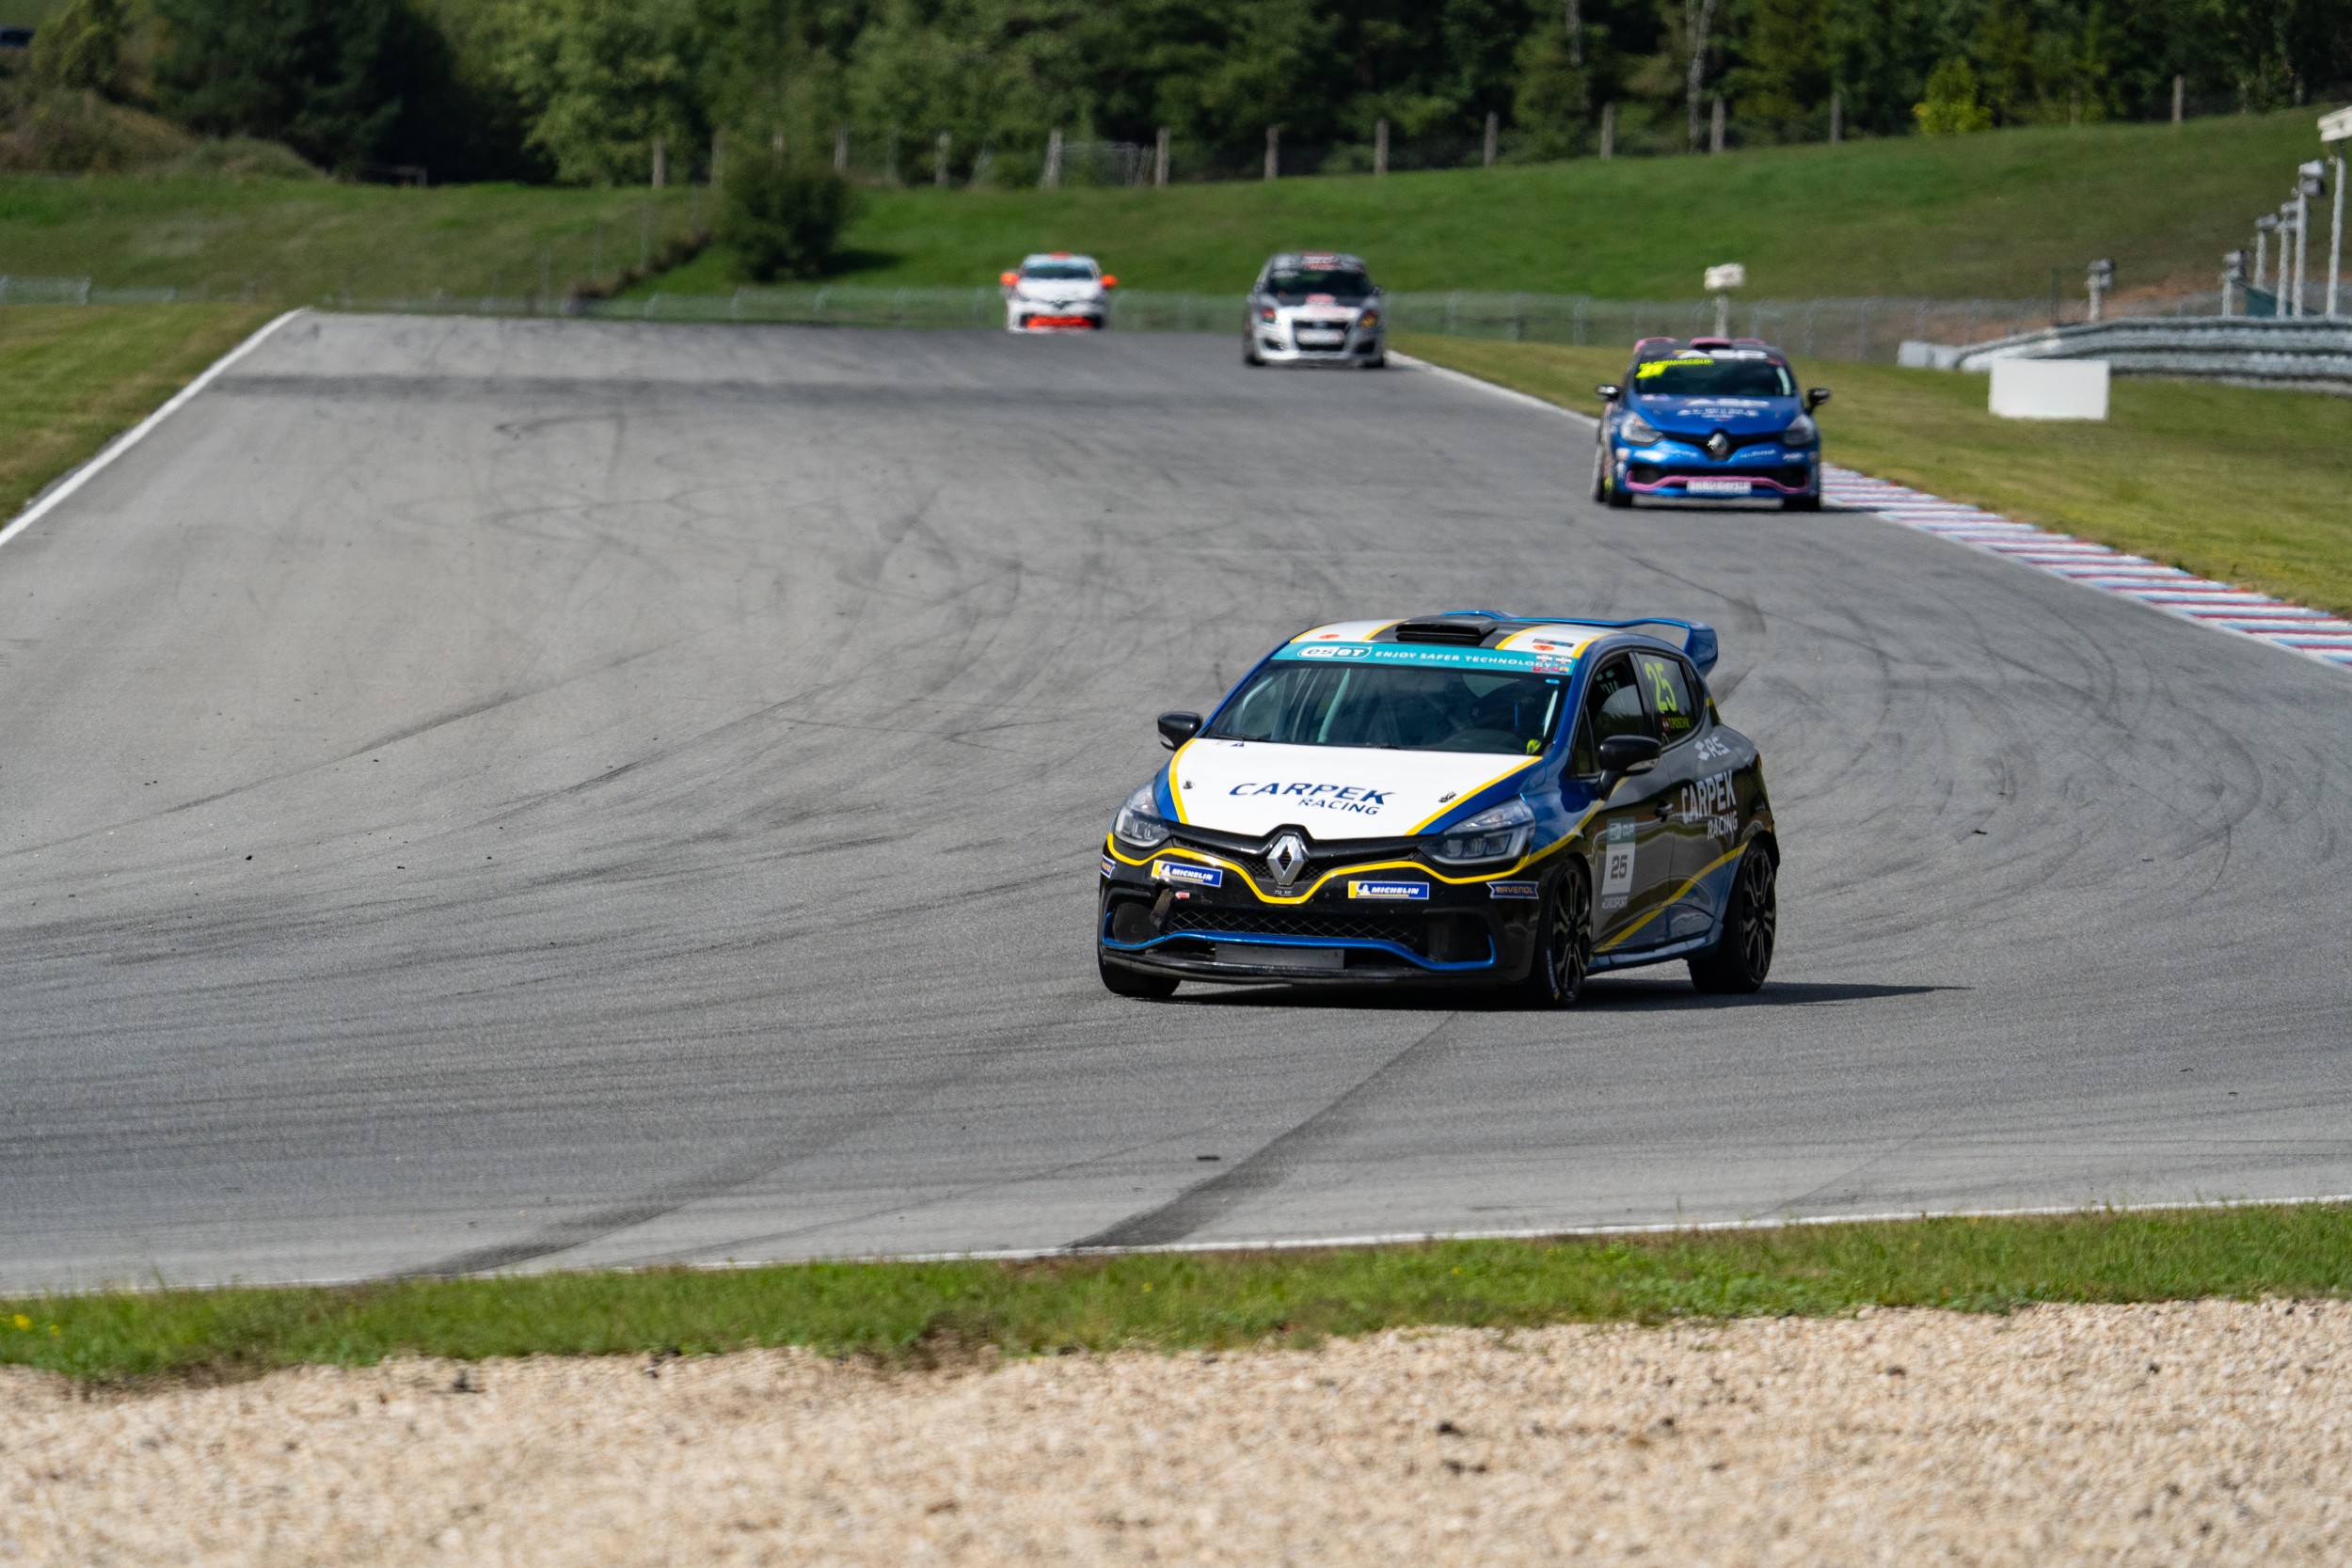 Tobias Poschik won and became the new Clio Cup champion